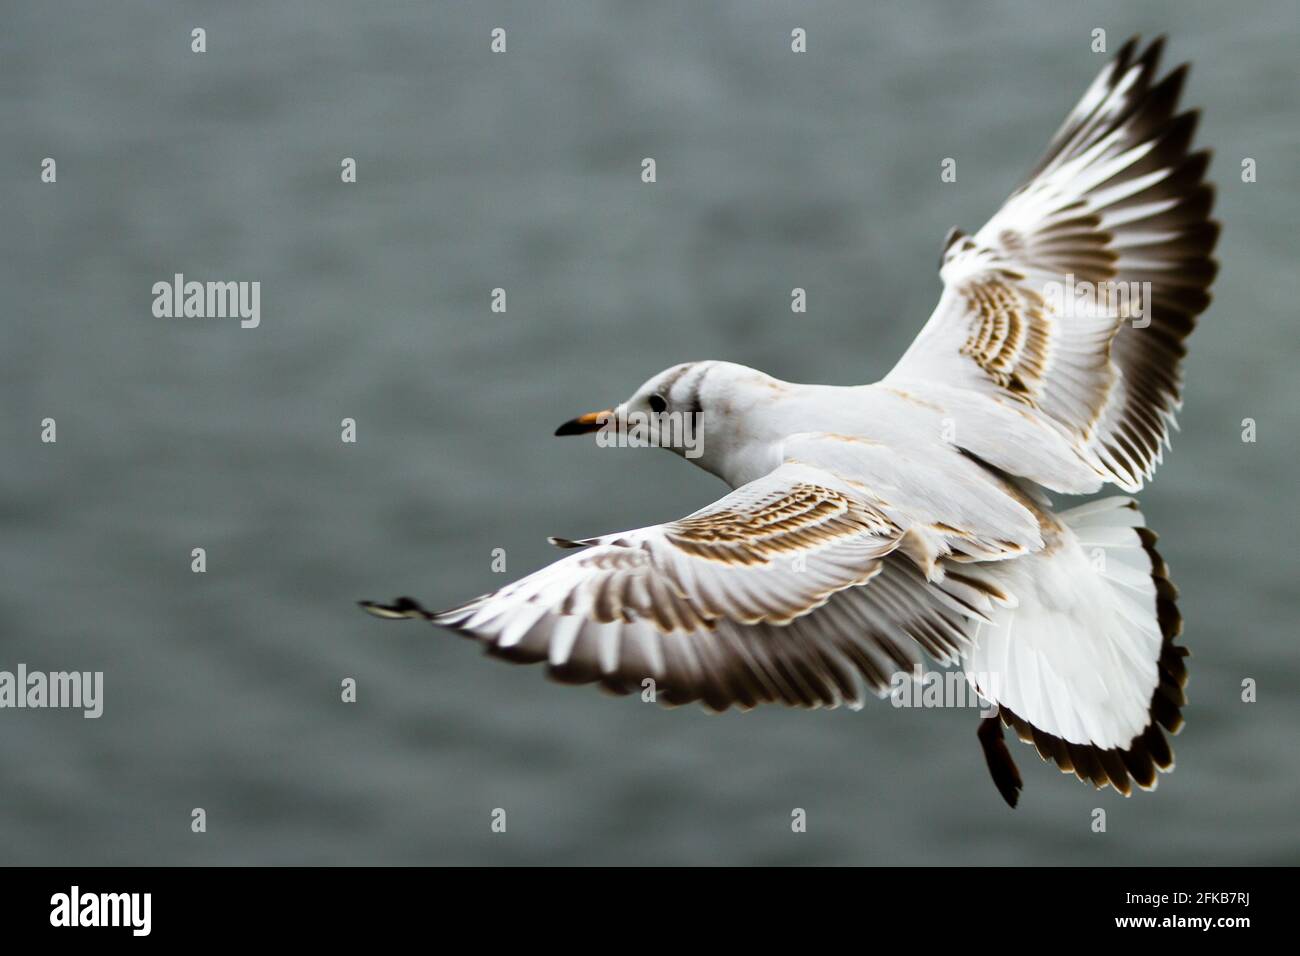 A bird flying over a body of water Stock Photo